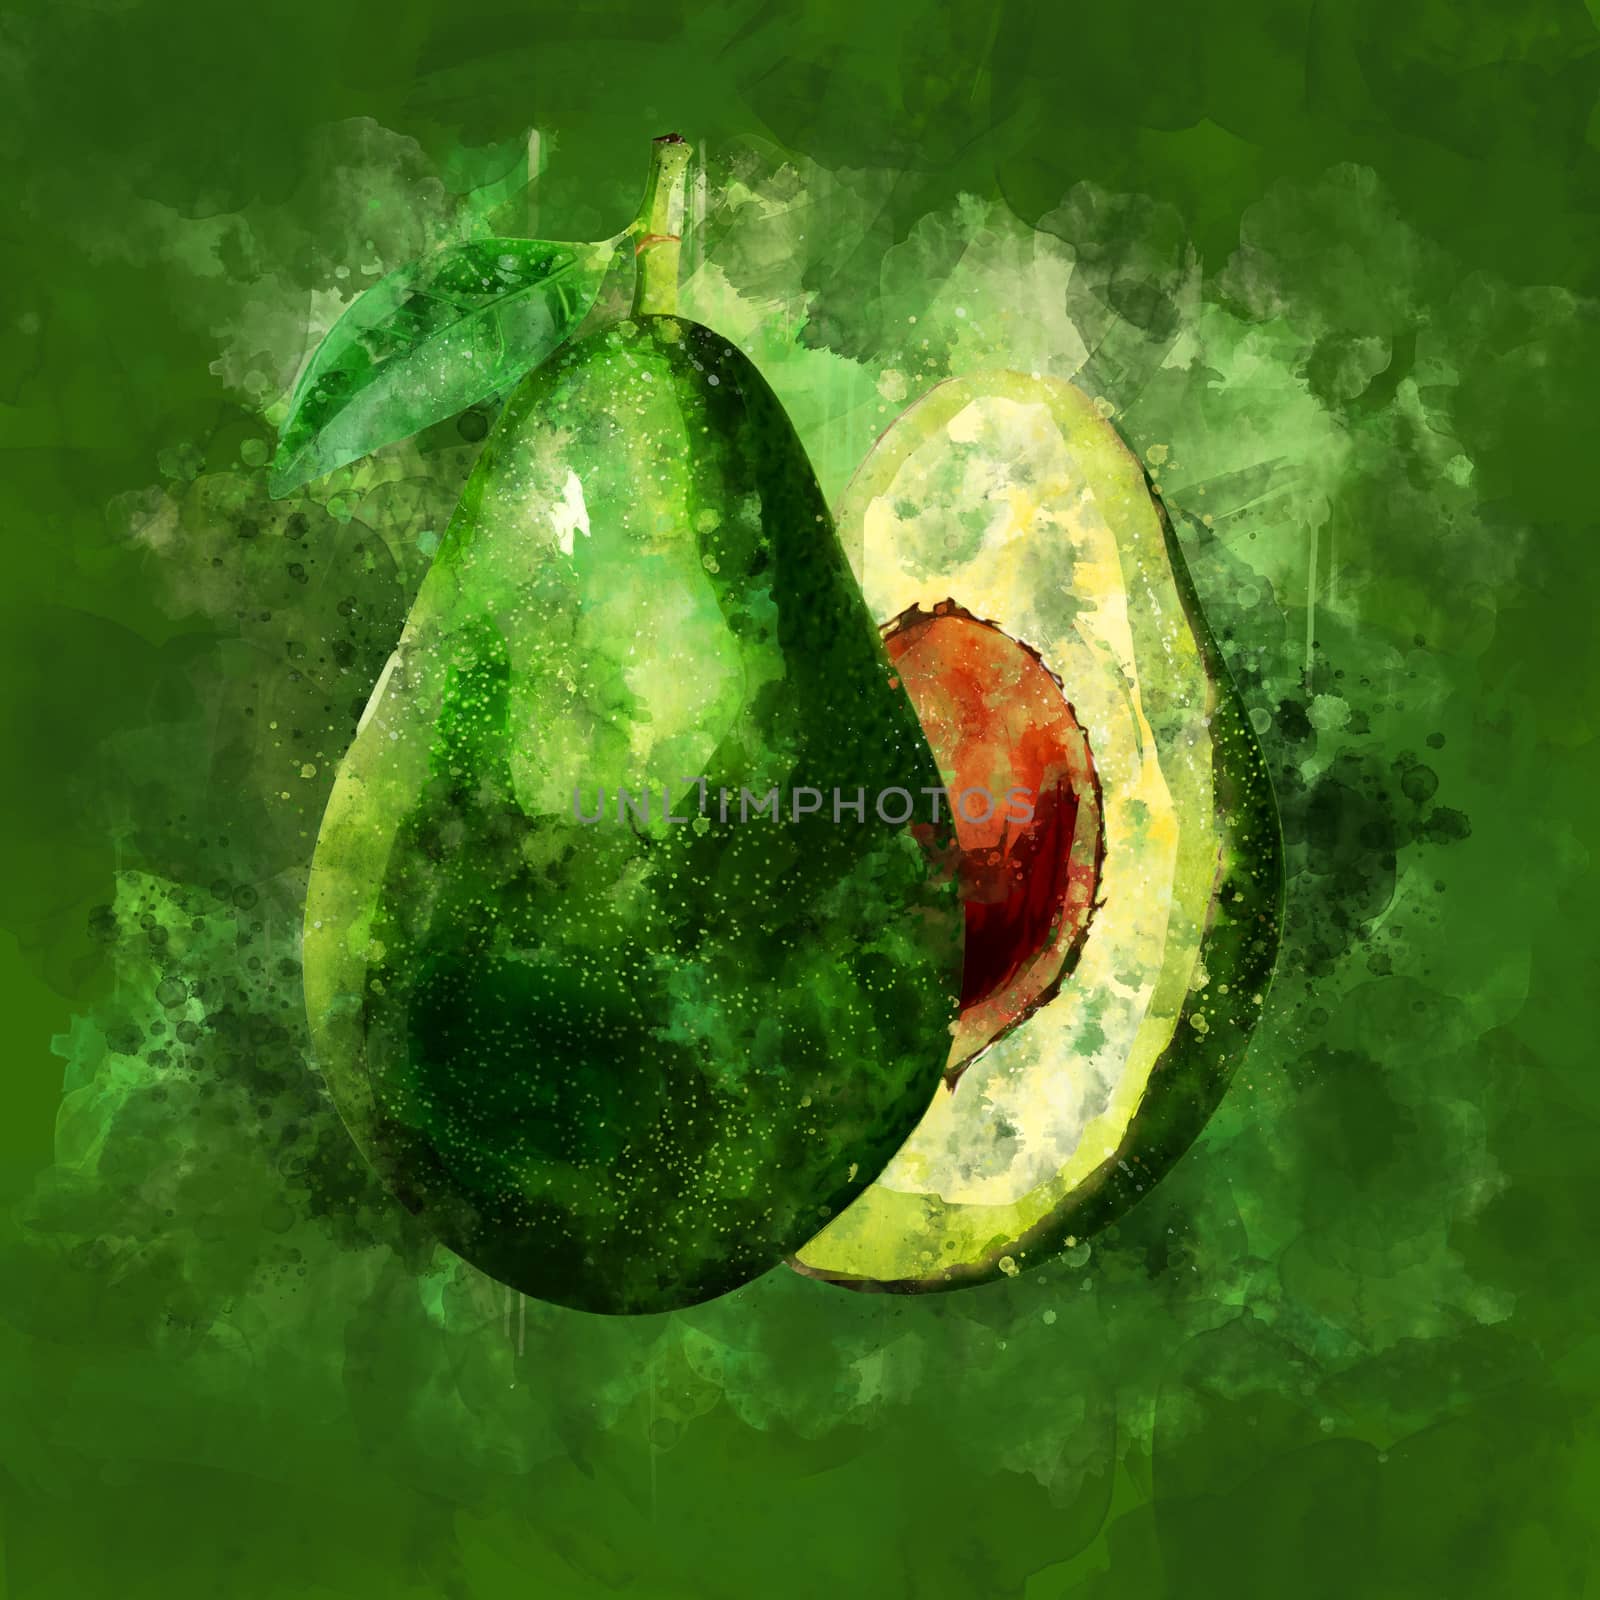 Avocado on green background. Watercolor illustration by ConceptCafe